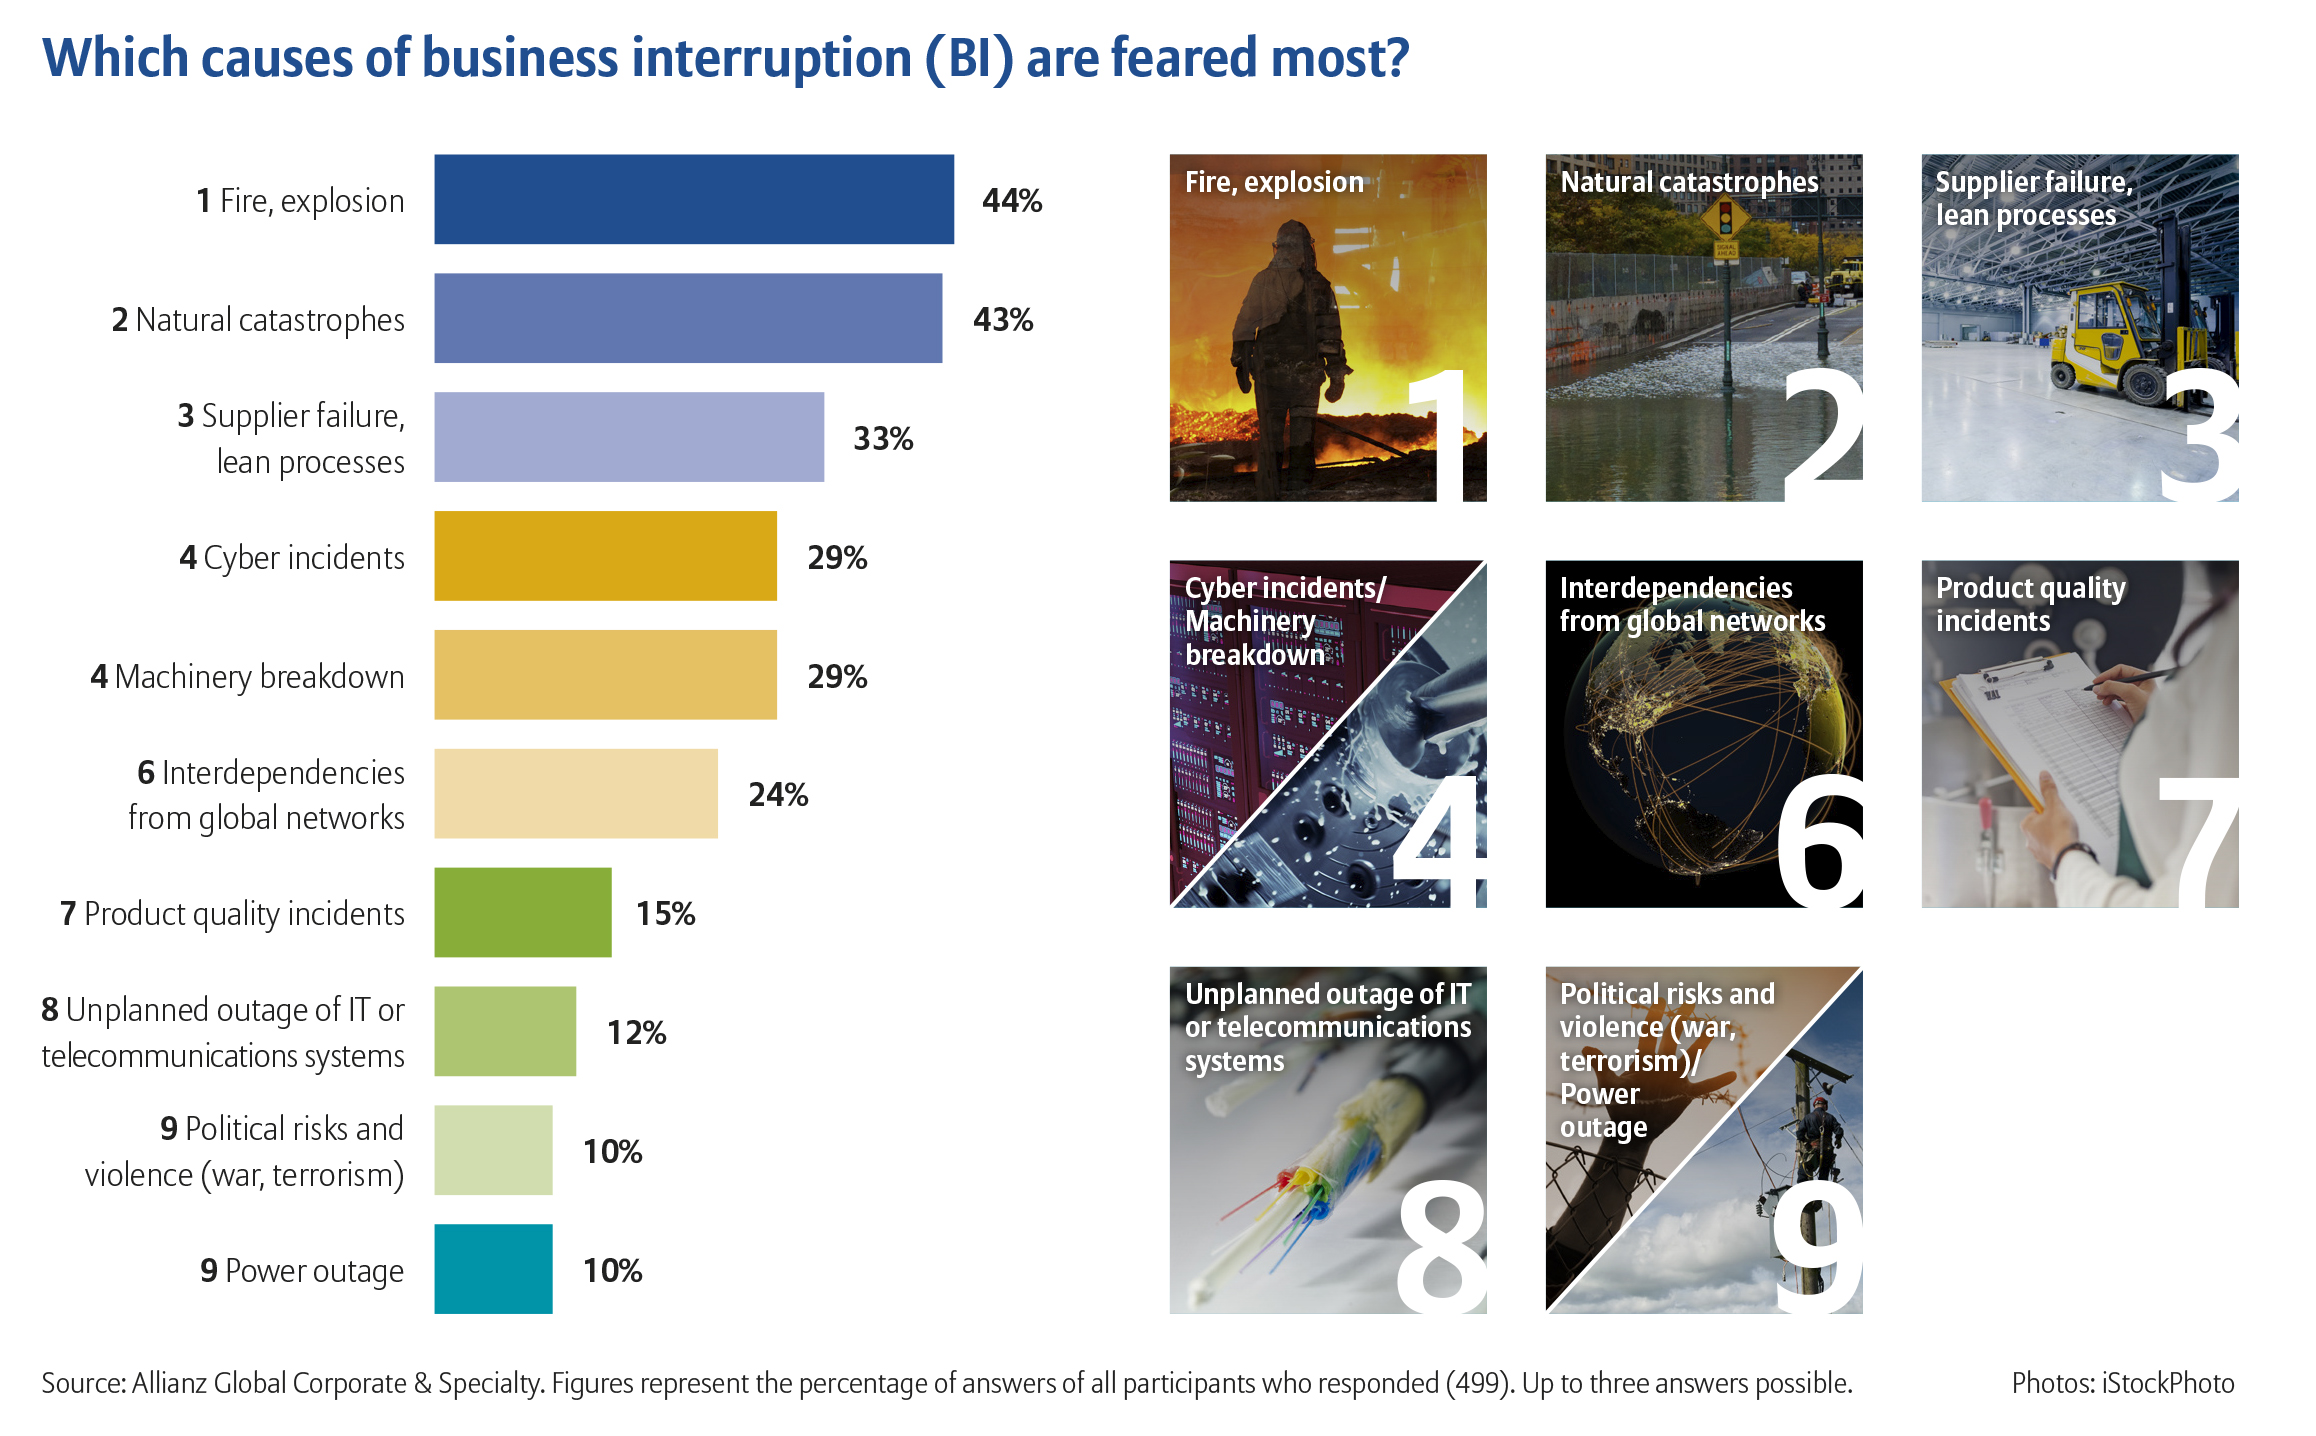 WHICH CAUSES OF BUSINESS INTERRUPTION (BI) ARE FEARED MOST?